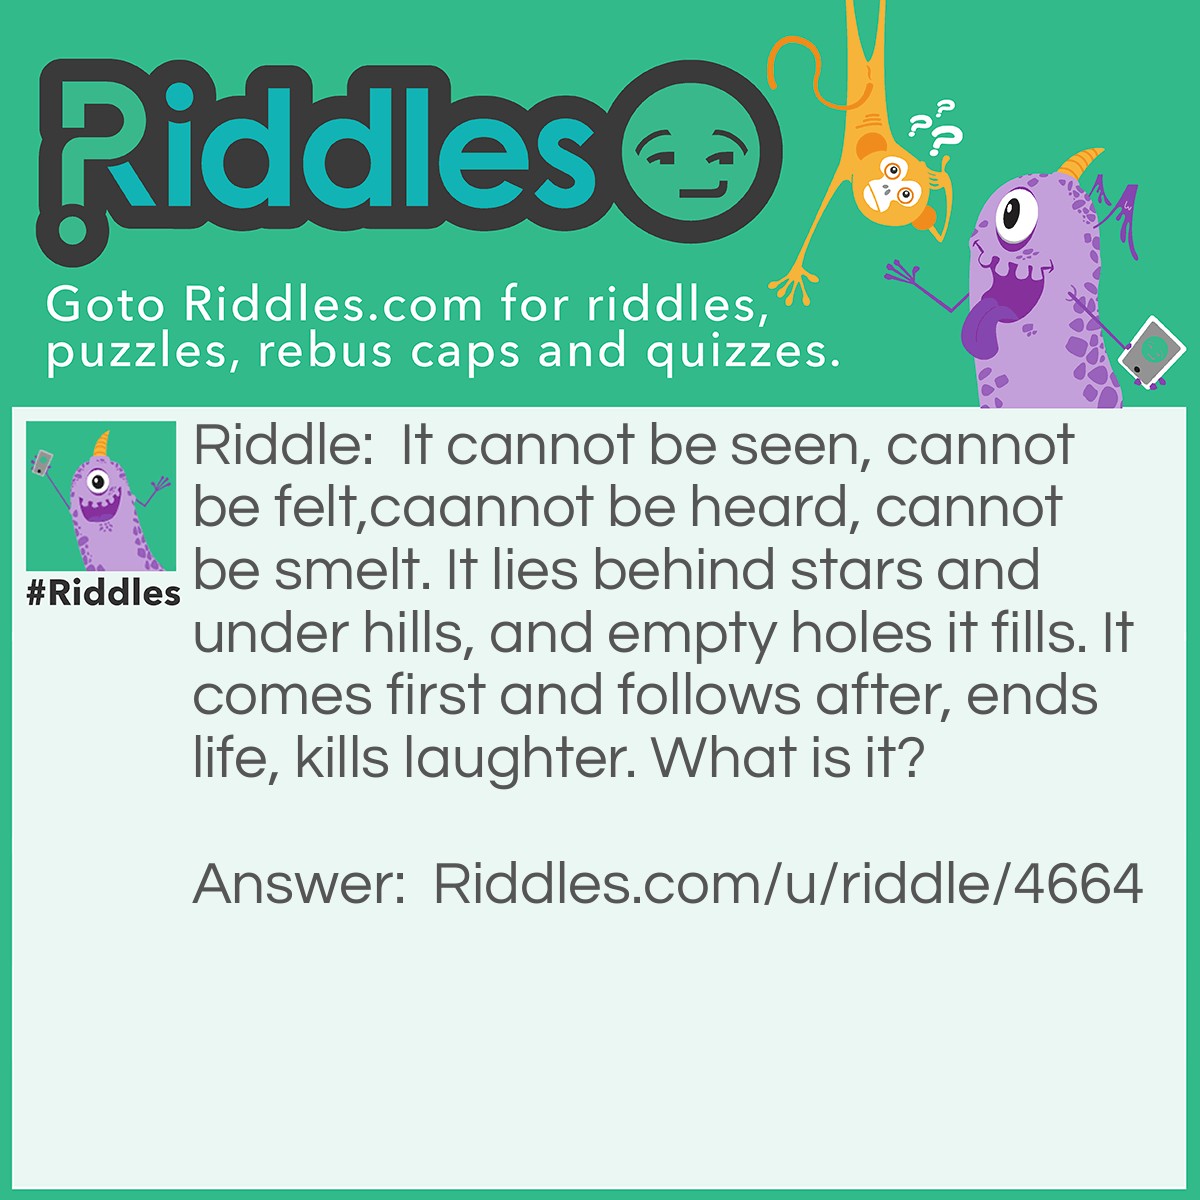 Riddle: It cannot be seen, cannot be felt,caannot be heard, cannot be smelt. It lies behind stars and under hills, and empty holes it fills. It comes first and follows after, ends life, kills laughter. What is it? Answer: Dark.